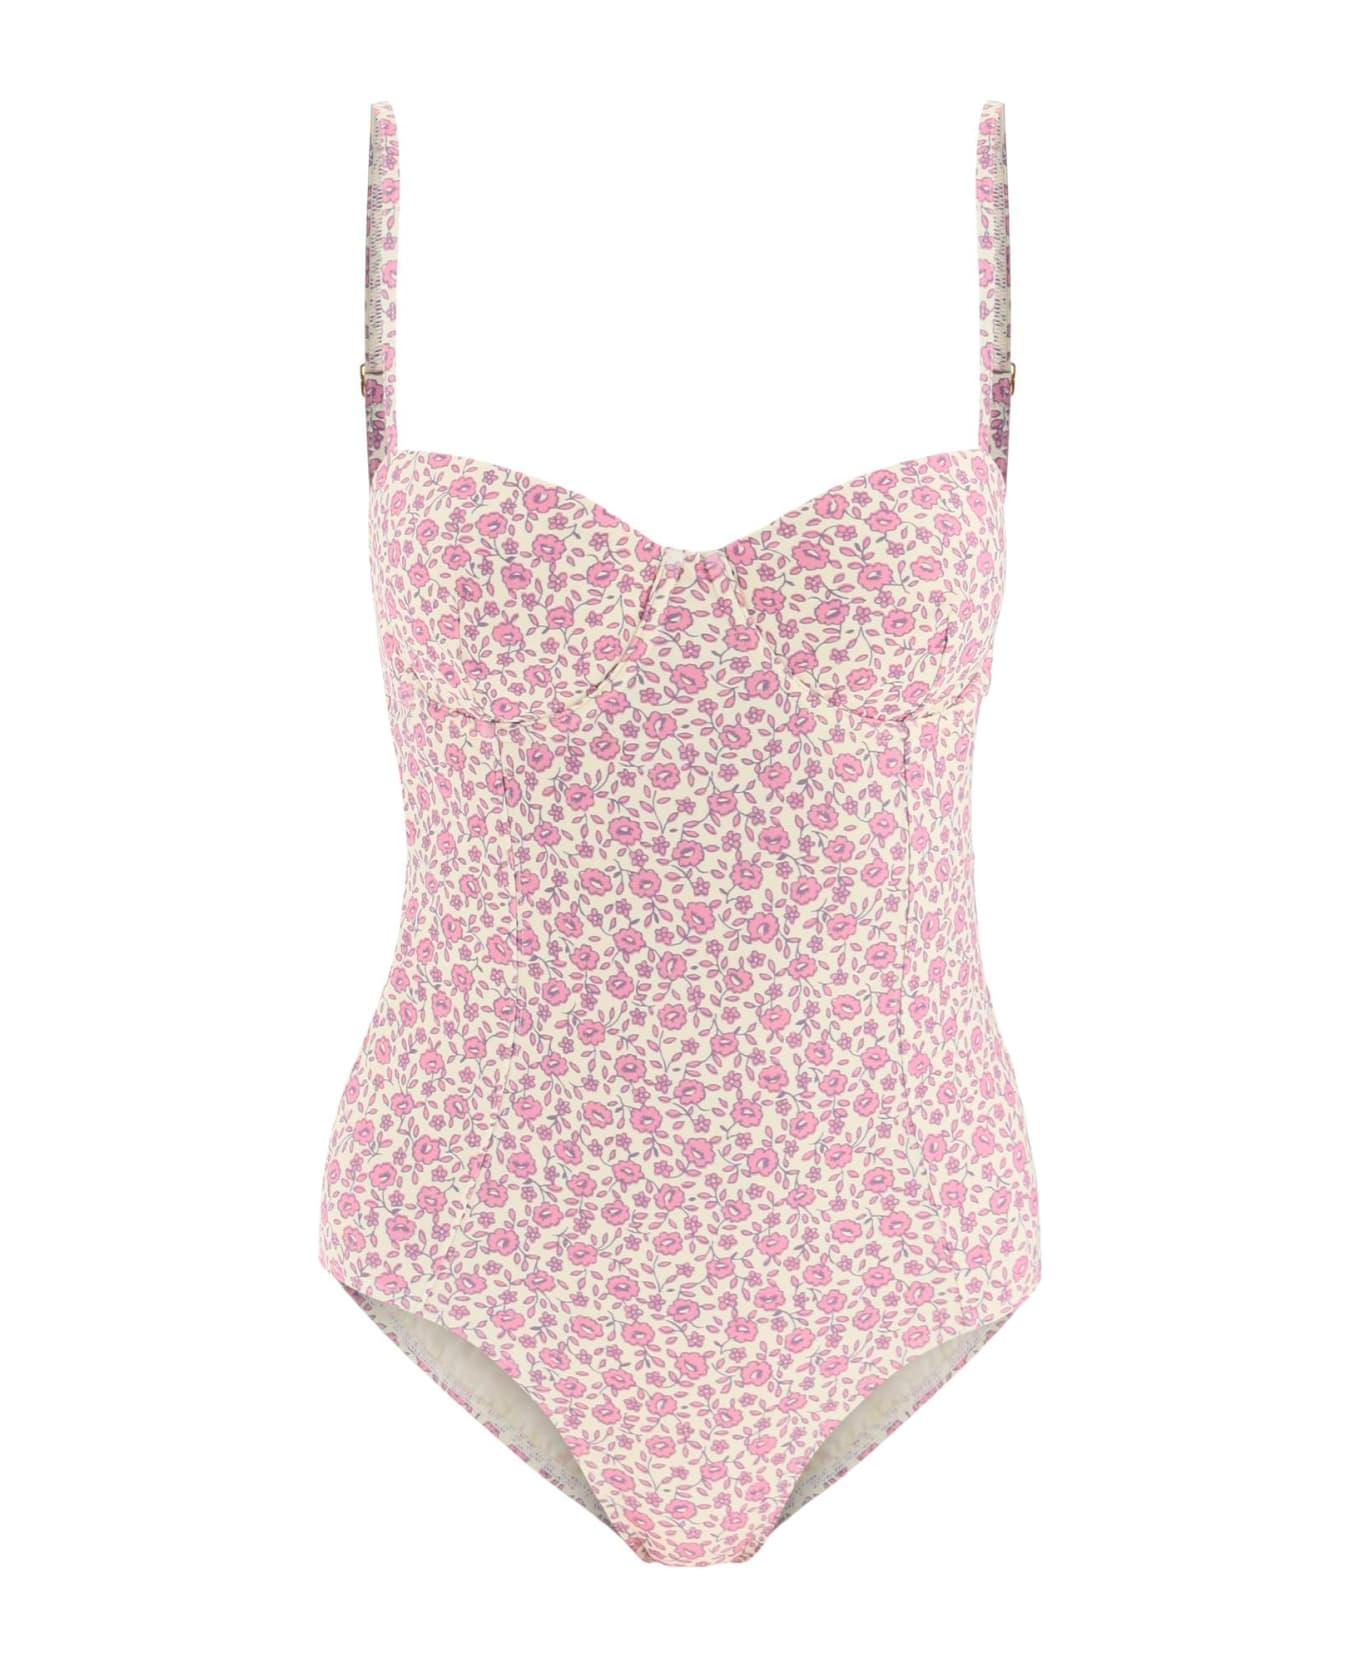 Tory Burch Floral One-piece Swimsuit - PINK TONAL DITSY (Beige)